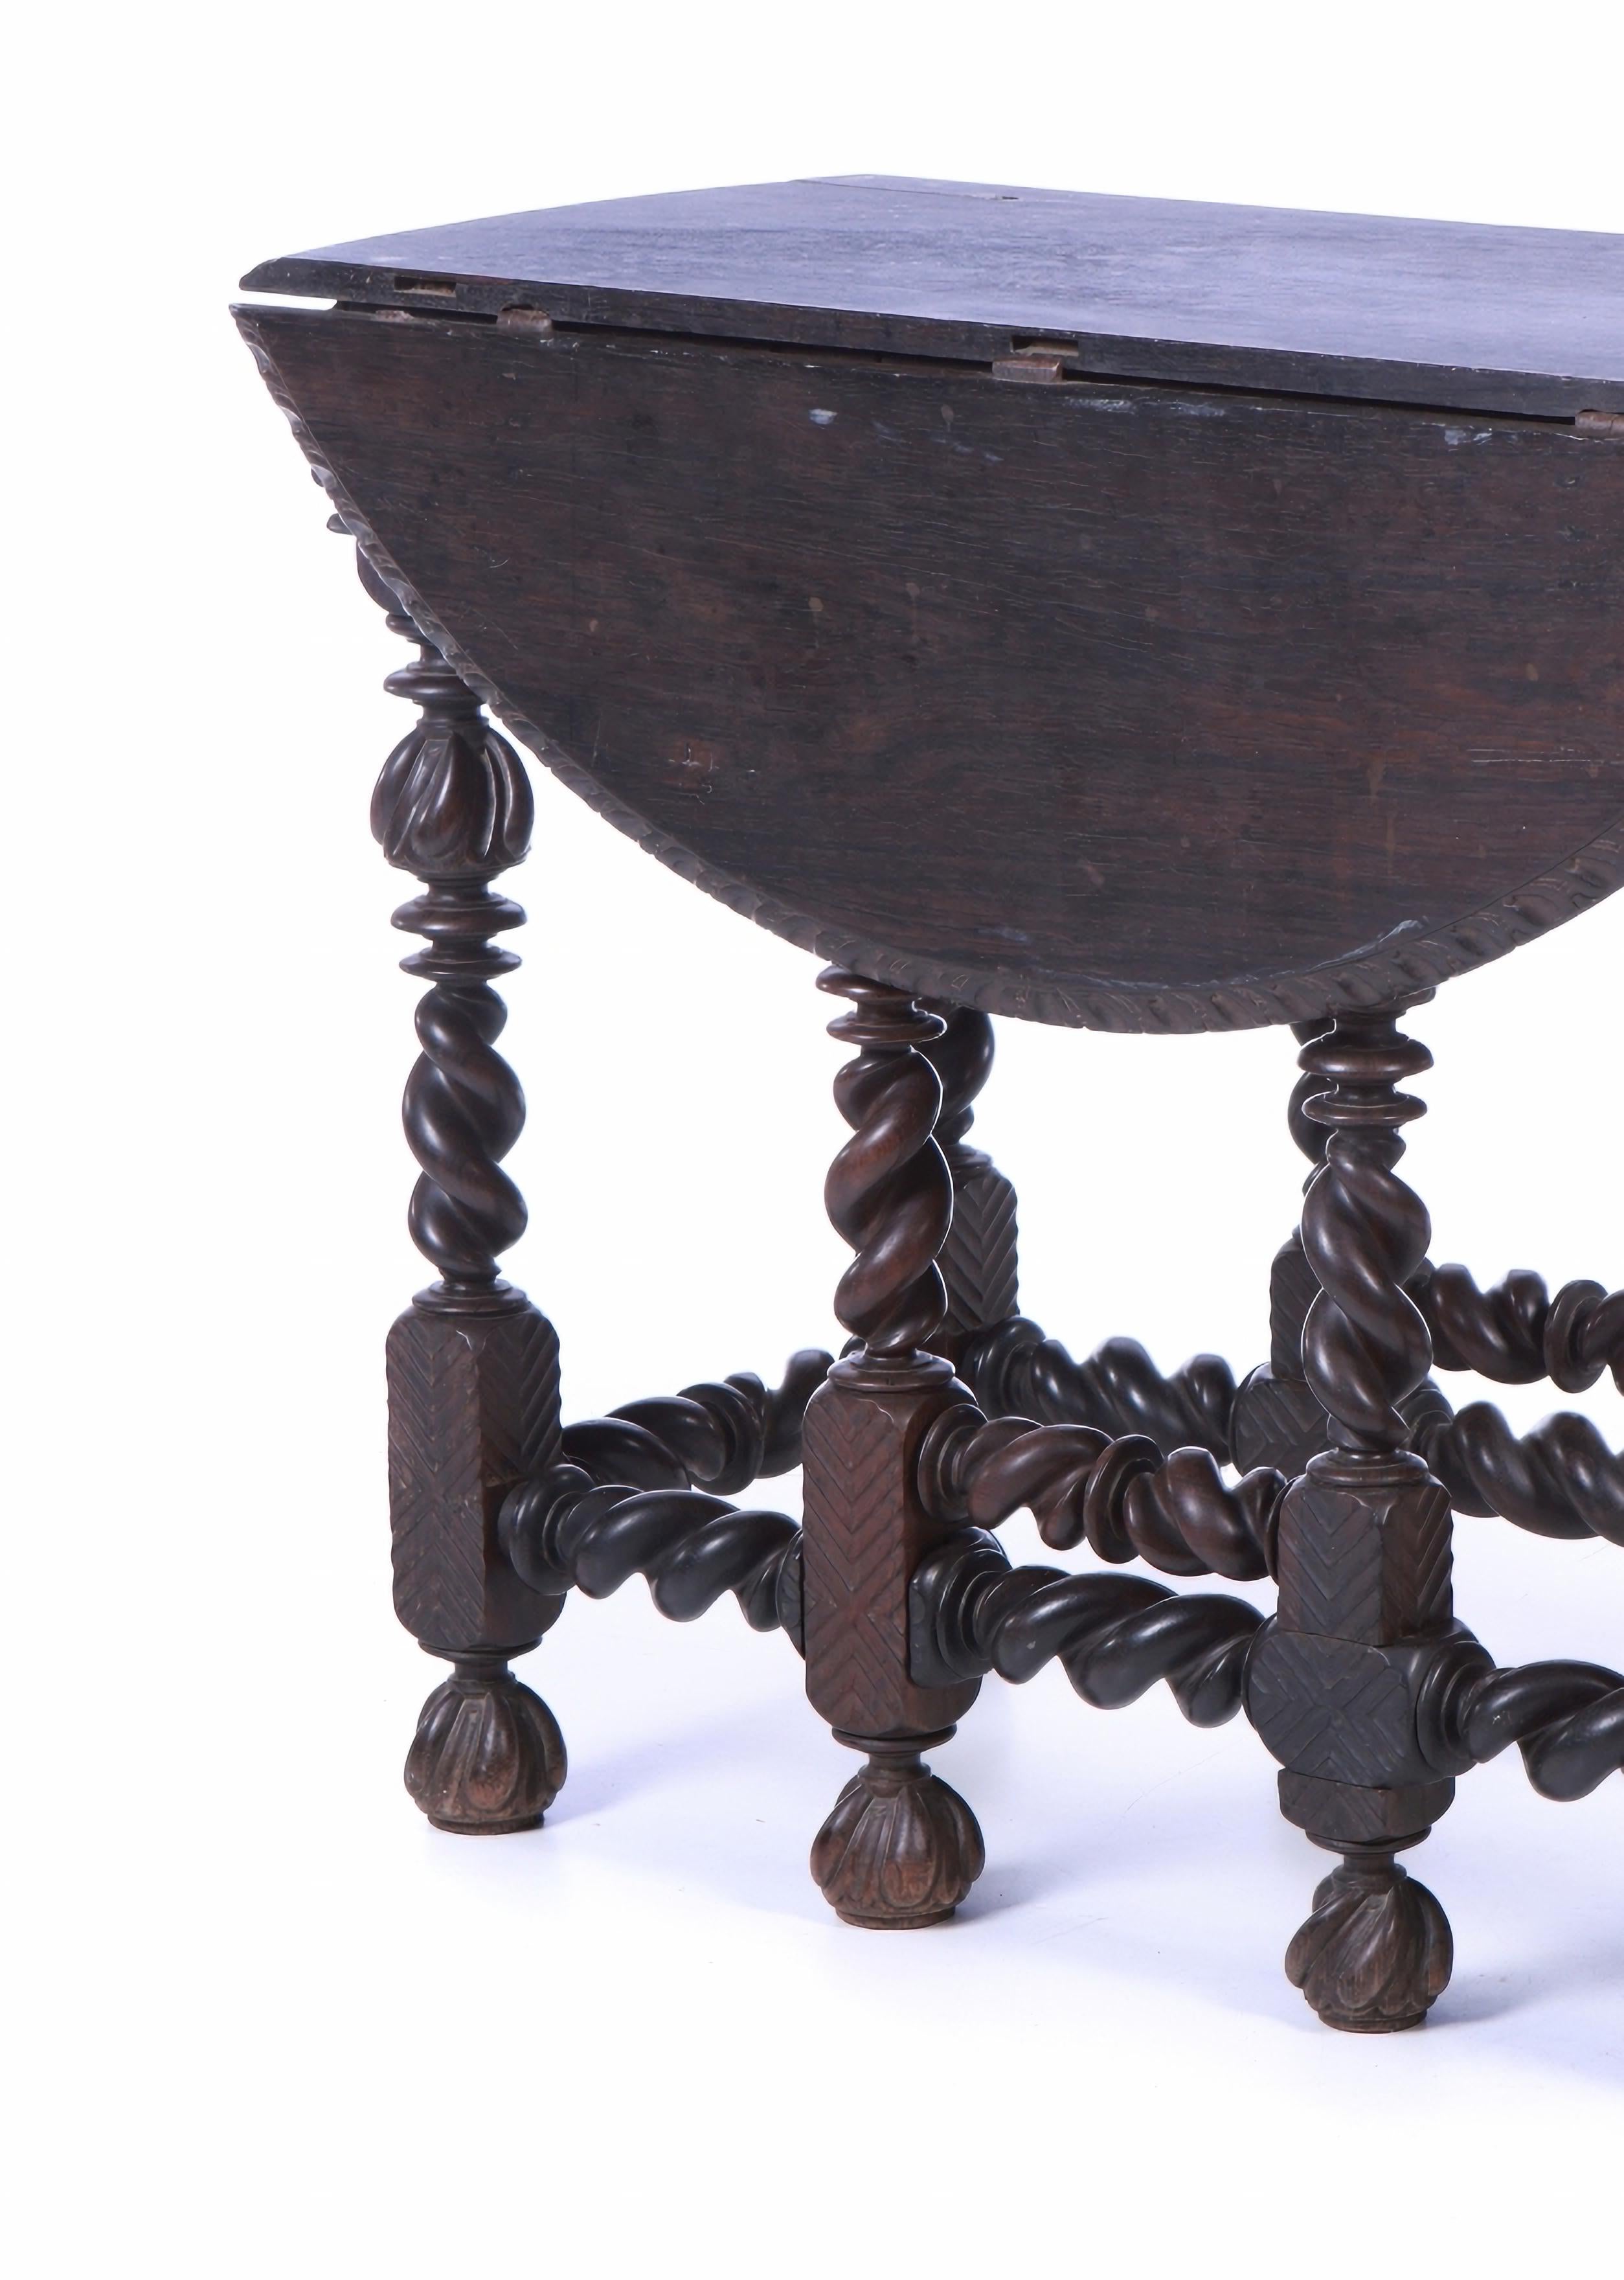 Baroque Portuguese Tab Table from the 17th Century